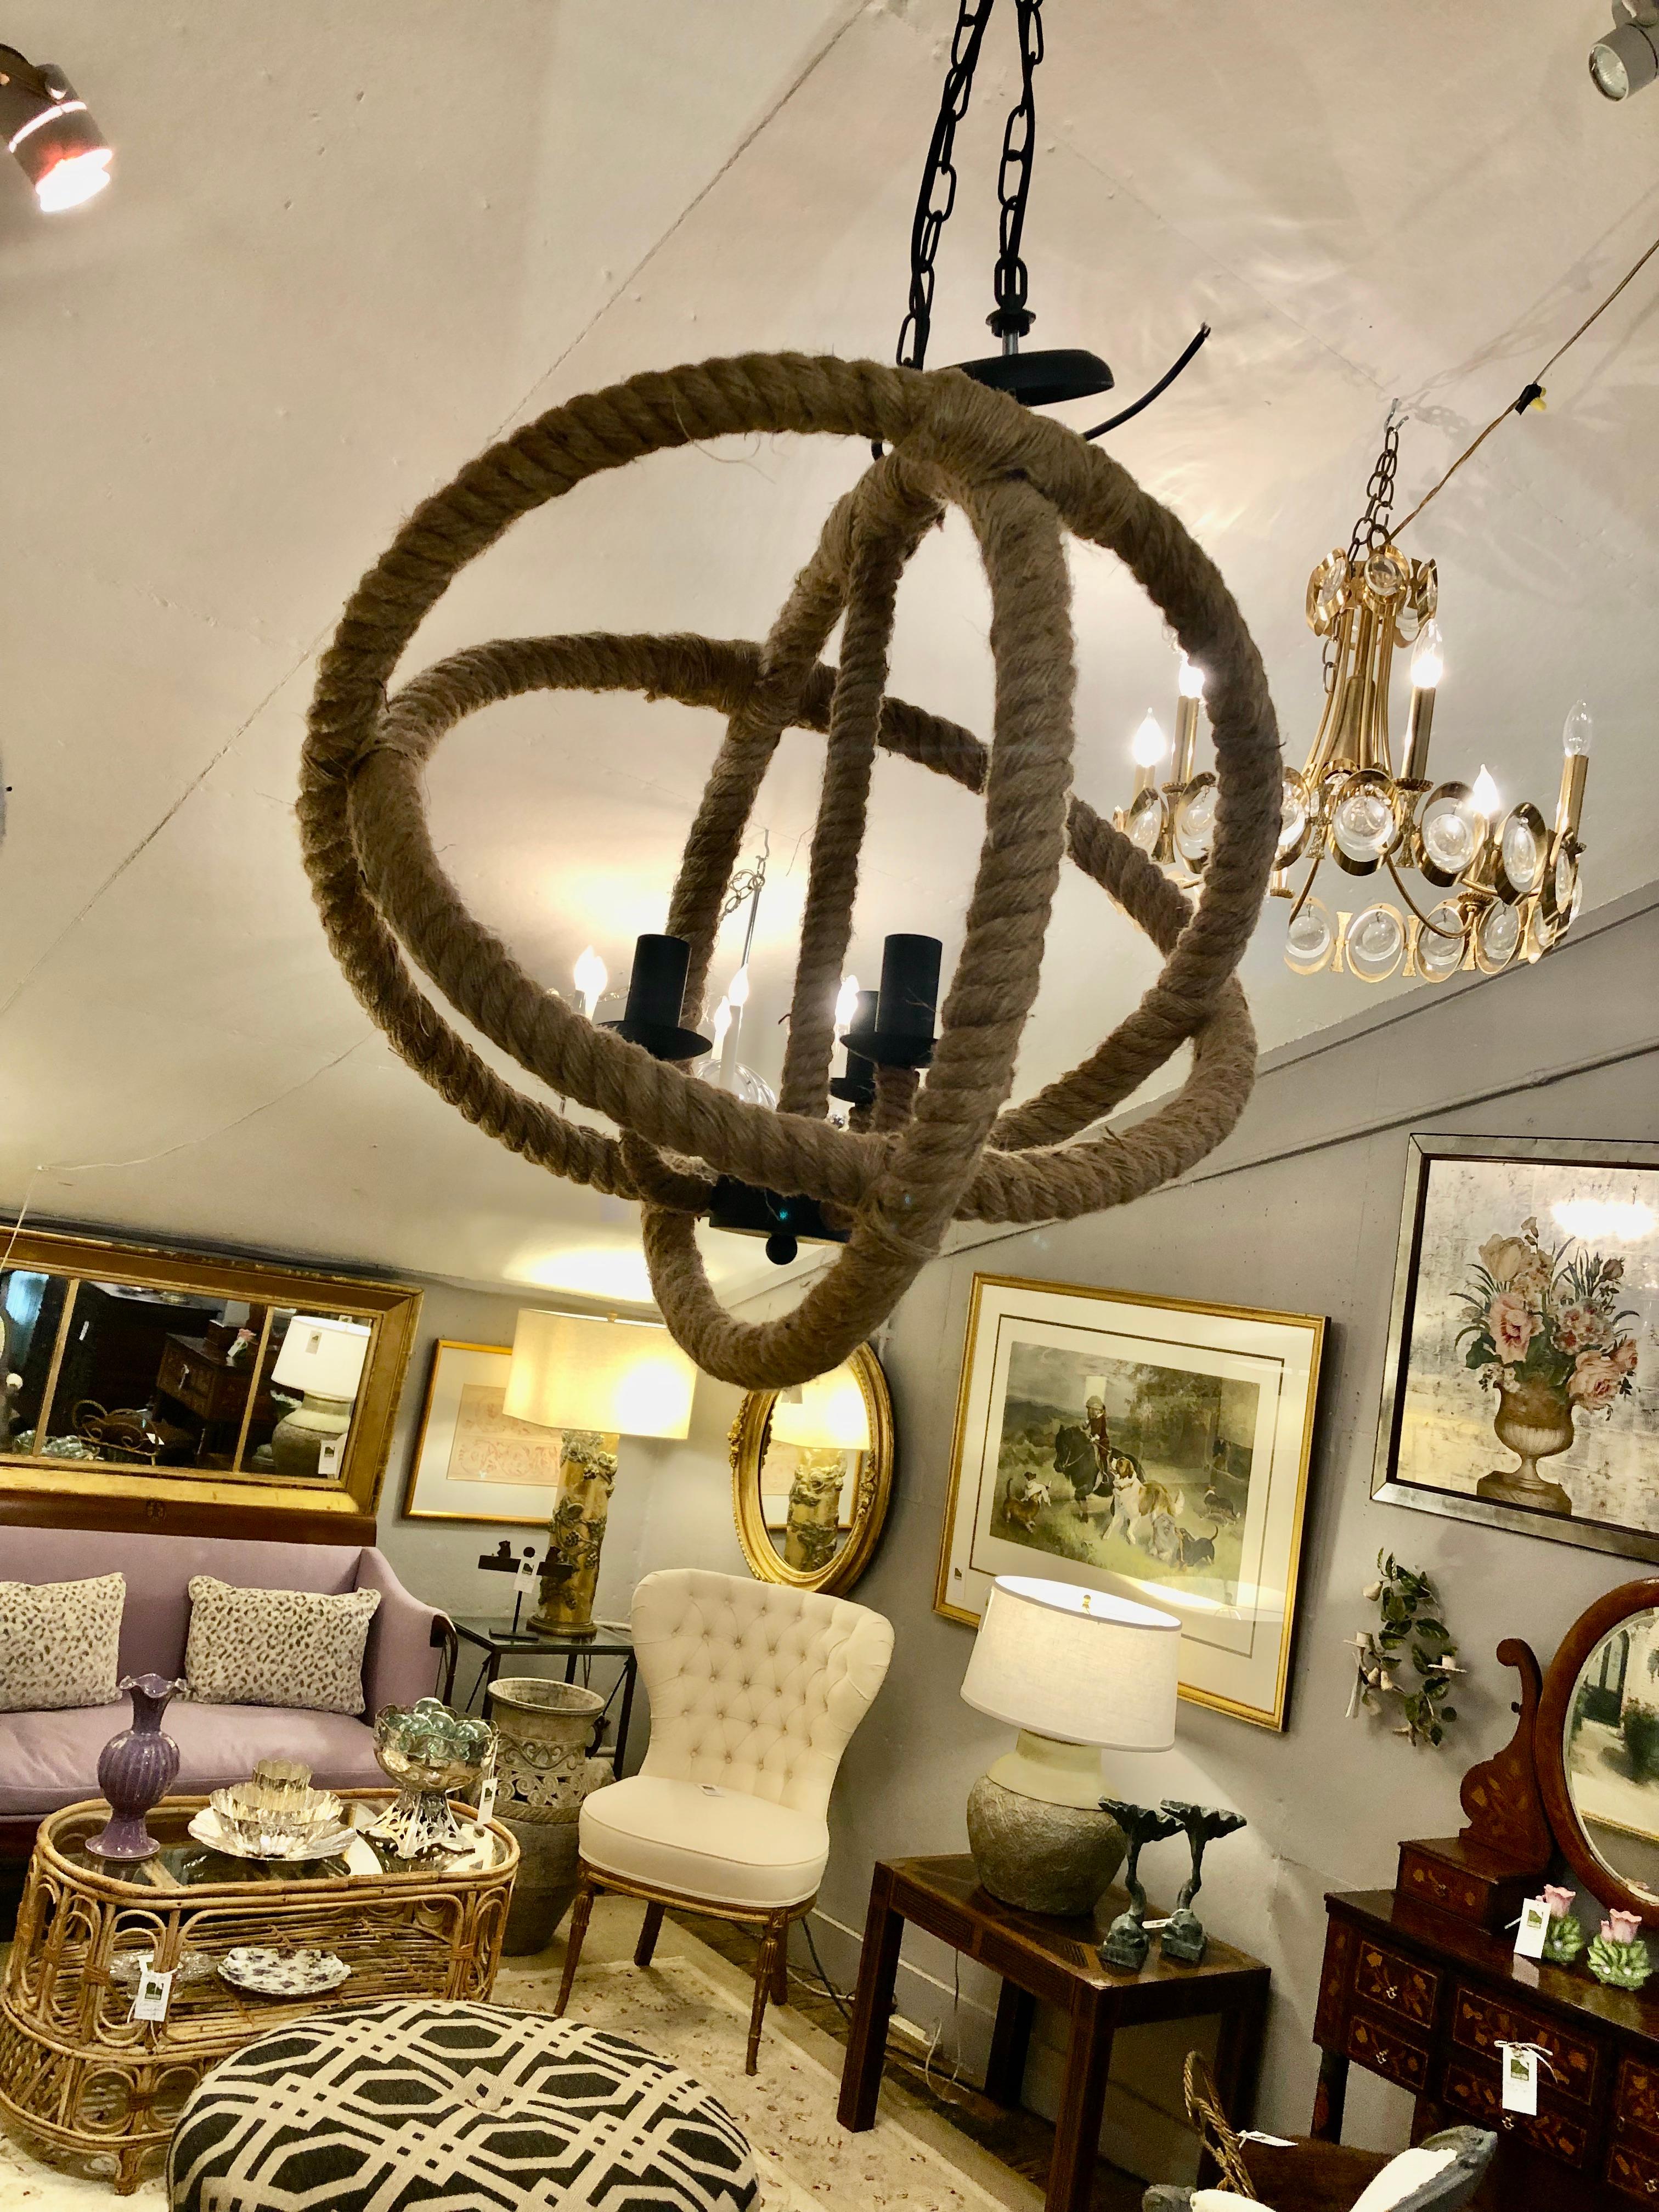 Great looking round armillary style chandelier wrapped in handsome rope with central 3 arm fixture in black iron.
Comes with original ceiling cap and 3 ft of chain.